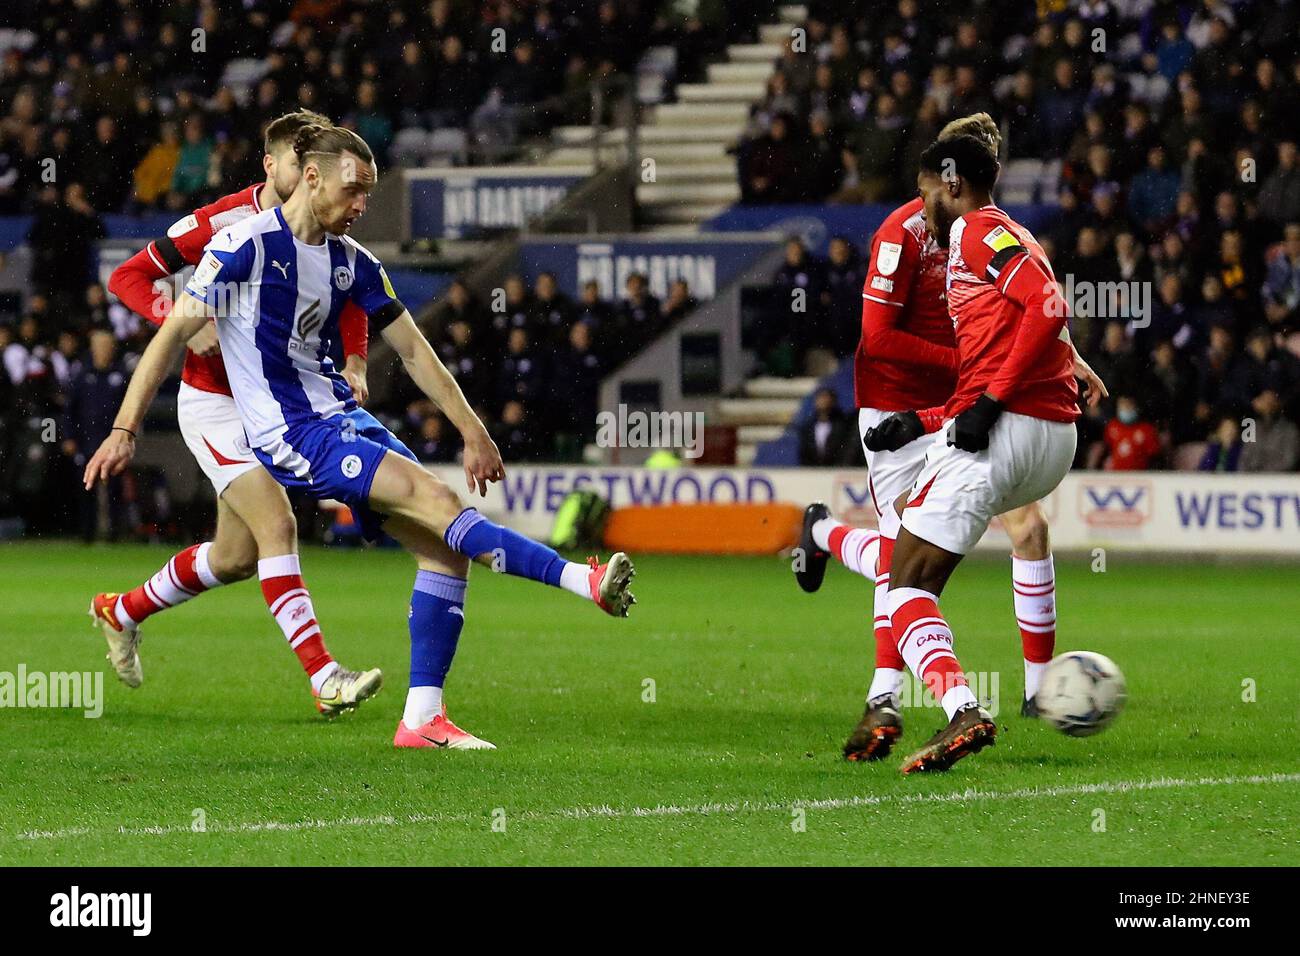 Wigan, UK. 15th Feb, 2022. Will Keane of Wigan Athletic during the Sky Bet League One match between Wigan Athletic and Crewe Alexandra at DW Stadium on February 15th 2022 in Wigan, England. (Photo by Tony Taylor/phcimages.com) Credit: PHC Images/Alamy Live News Stock Photo